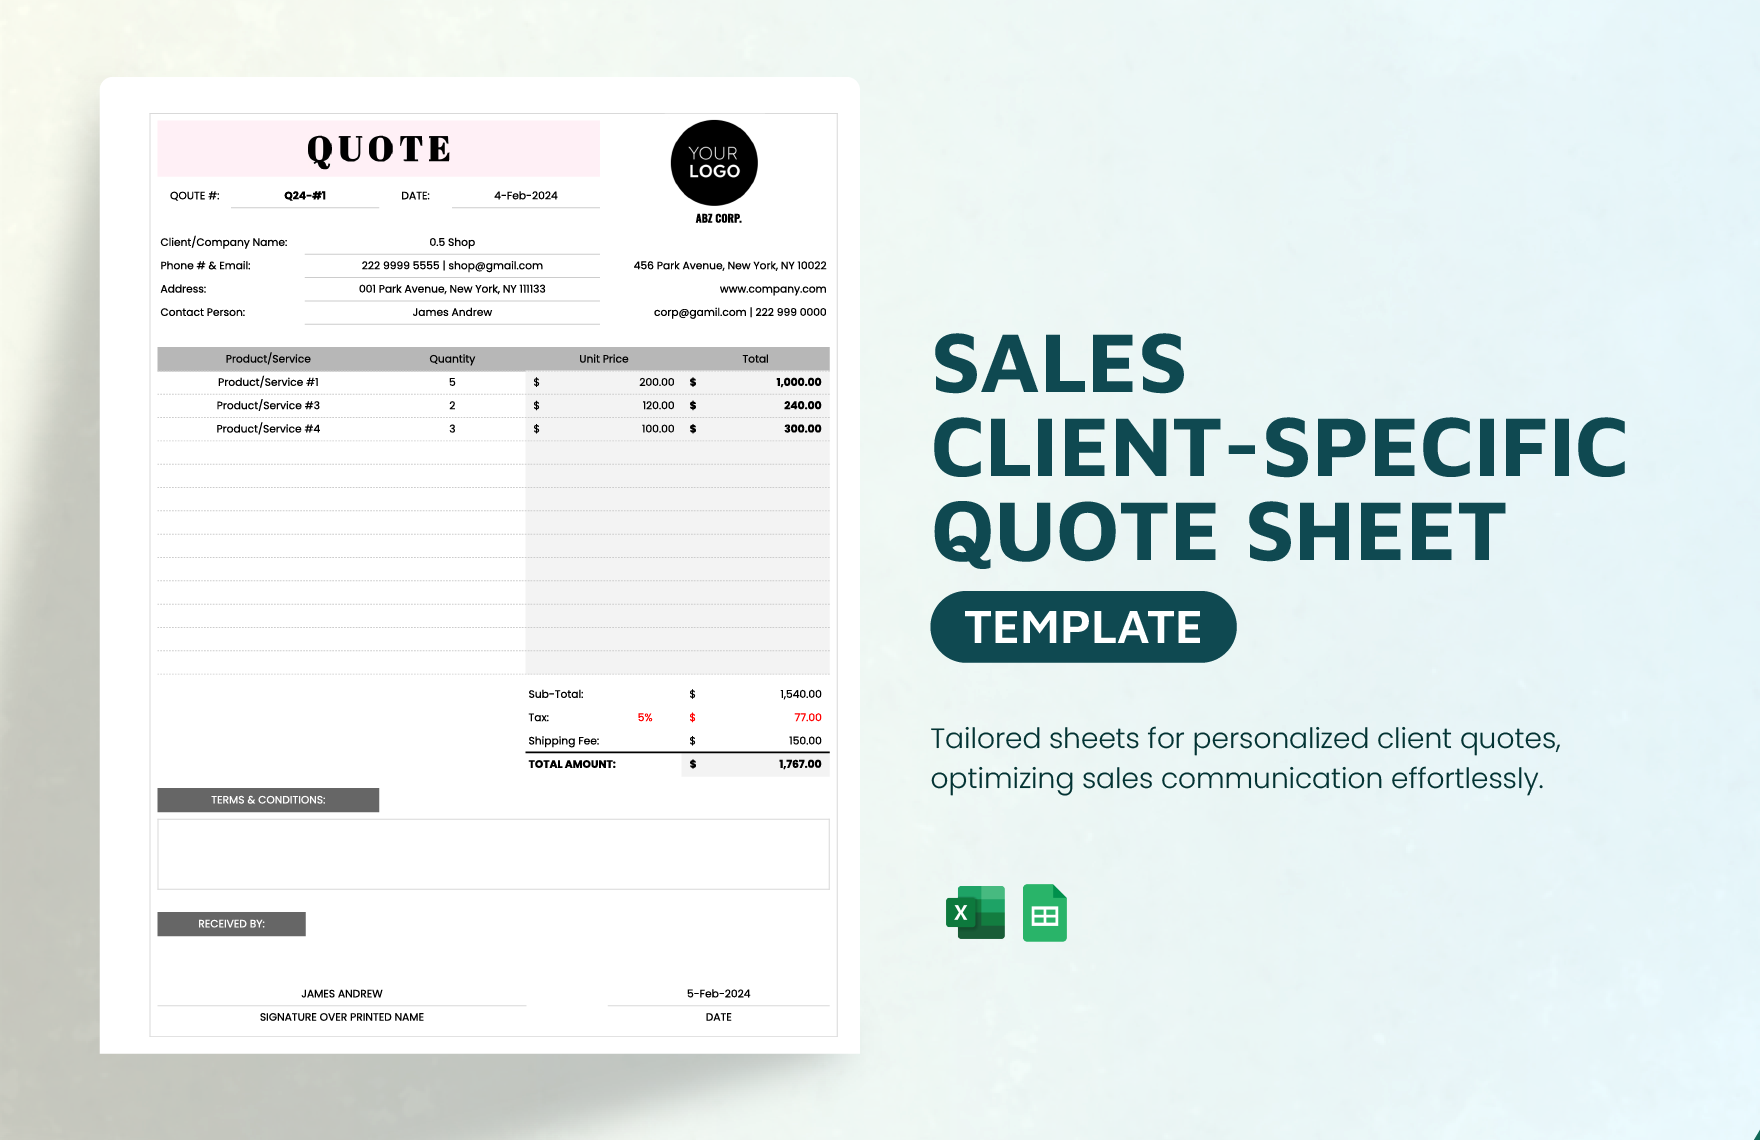 Sales Client-specific Quote Sheet Template